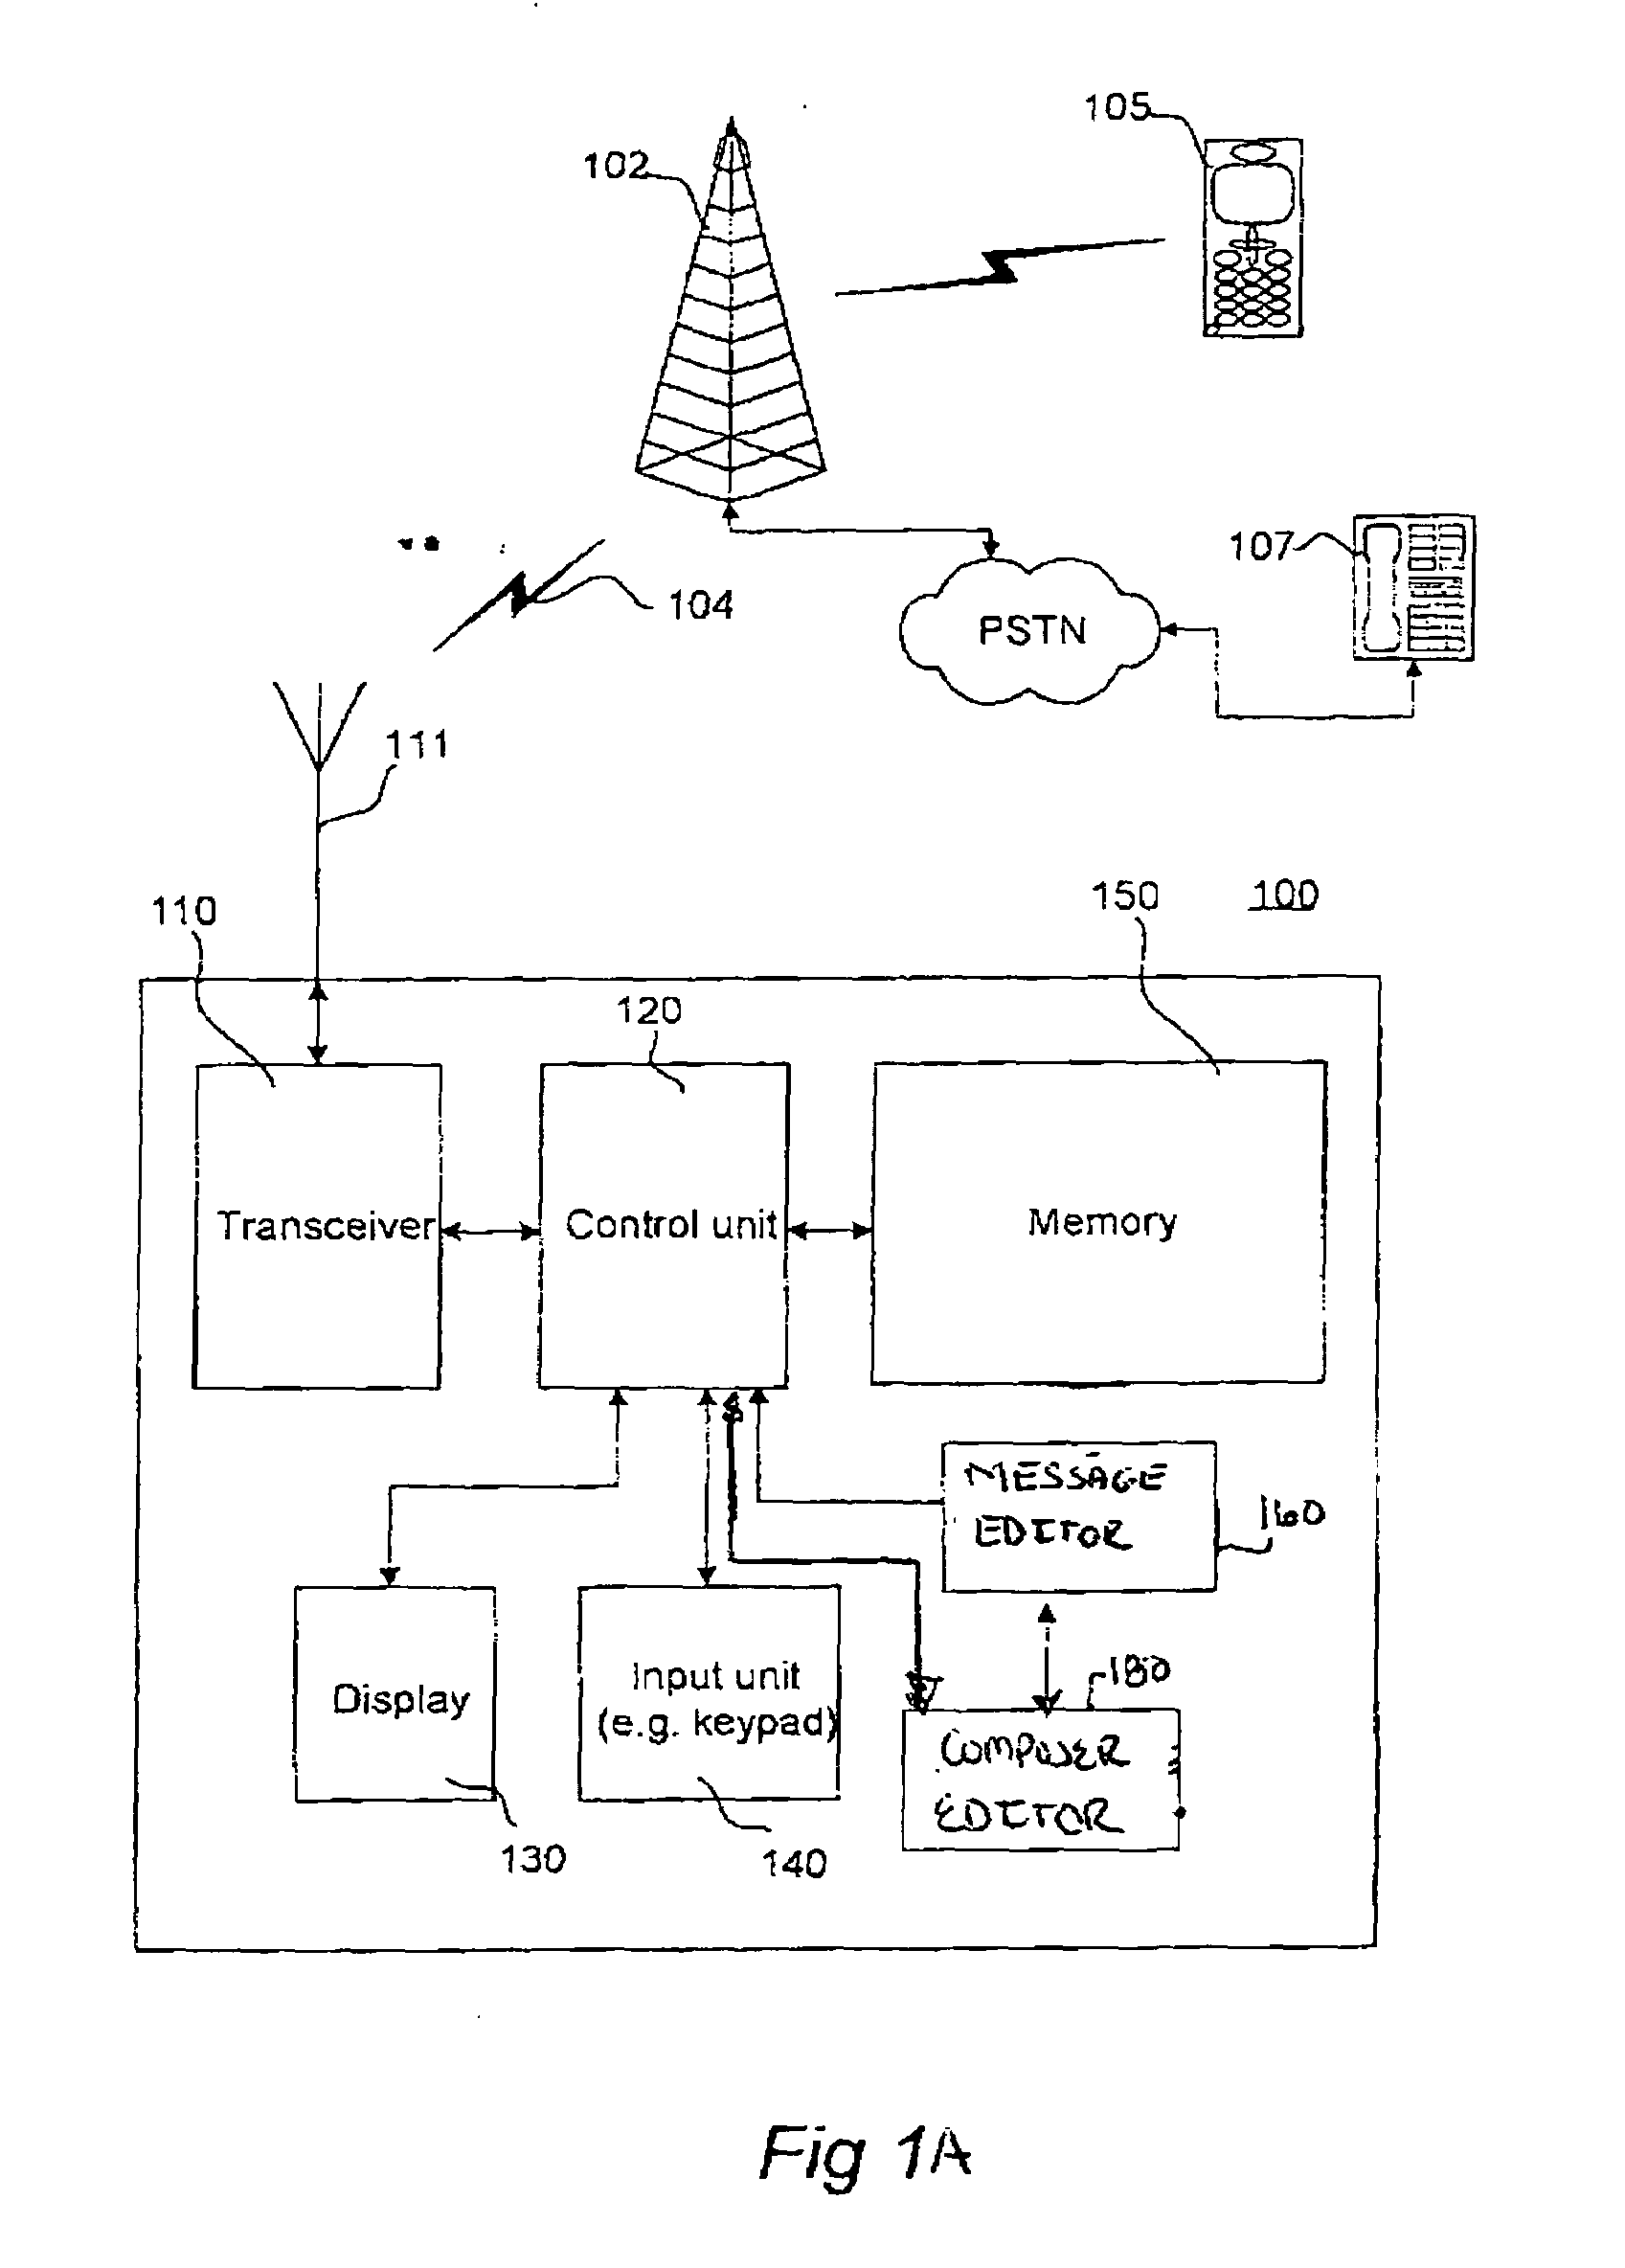 Method and apparatus for music enhanced messaging